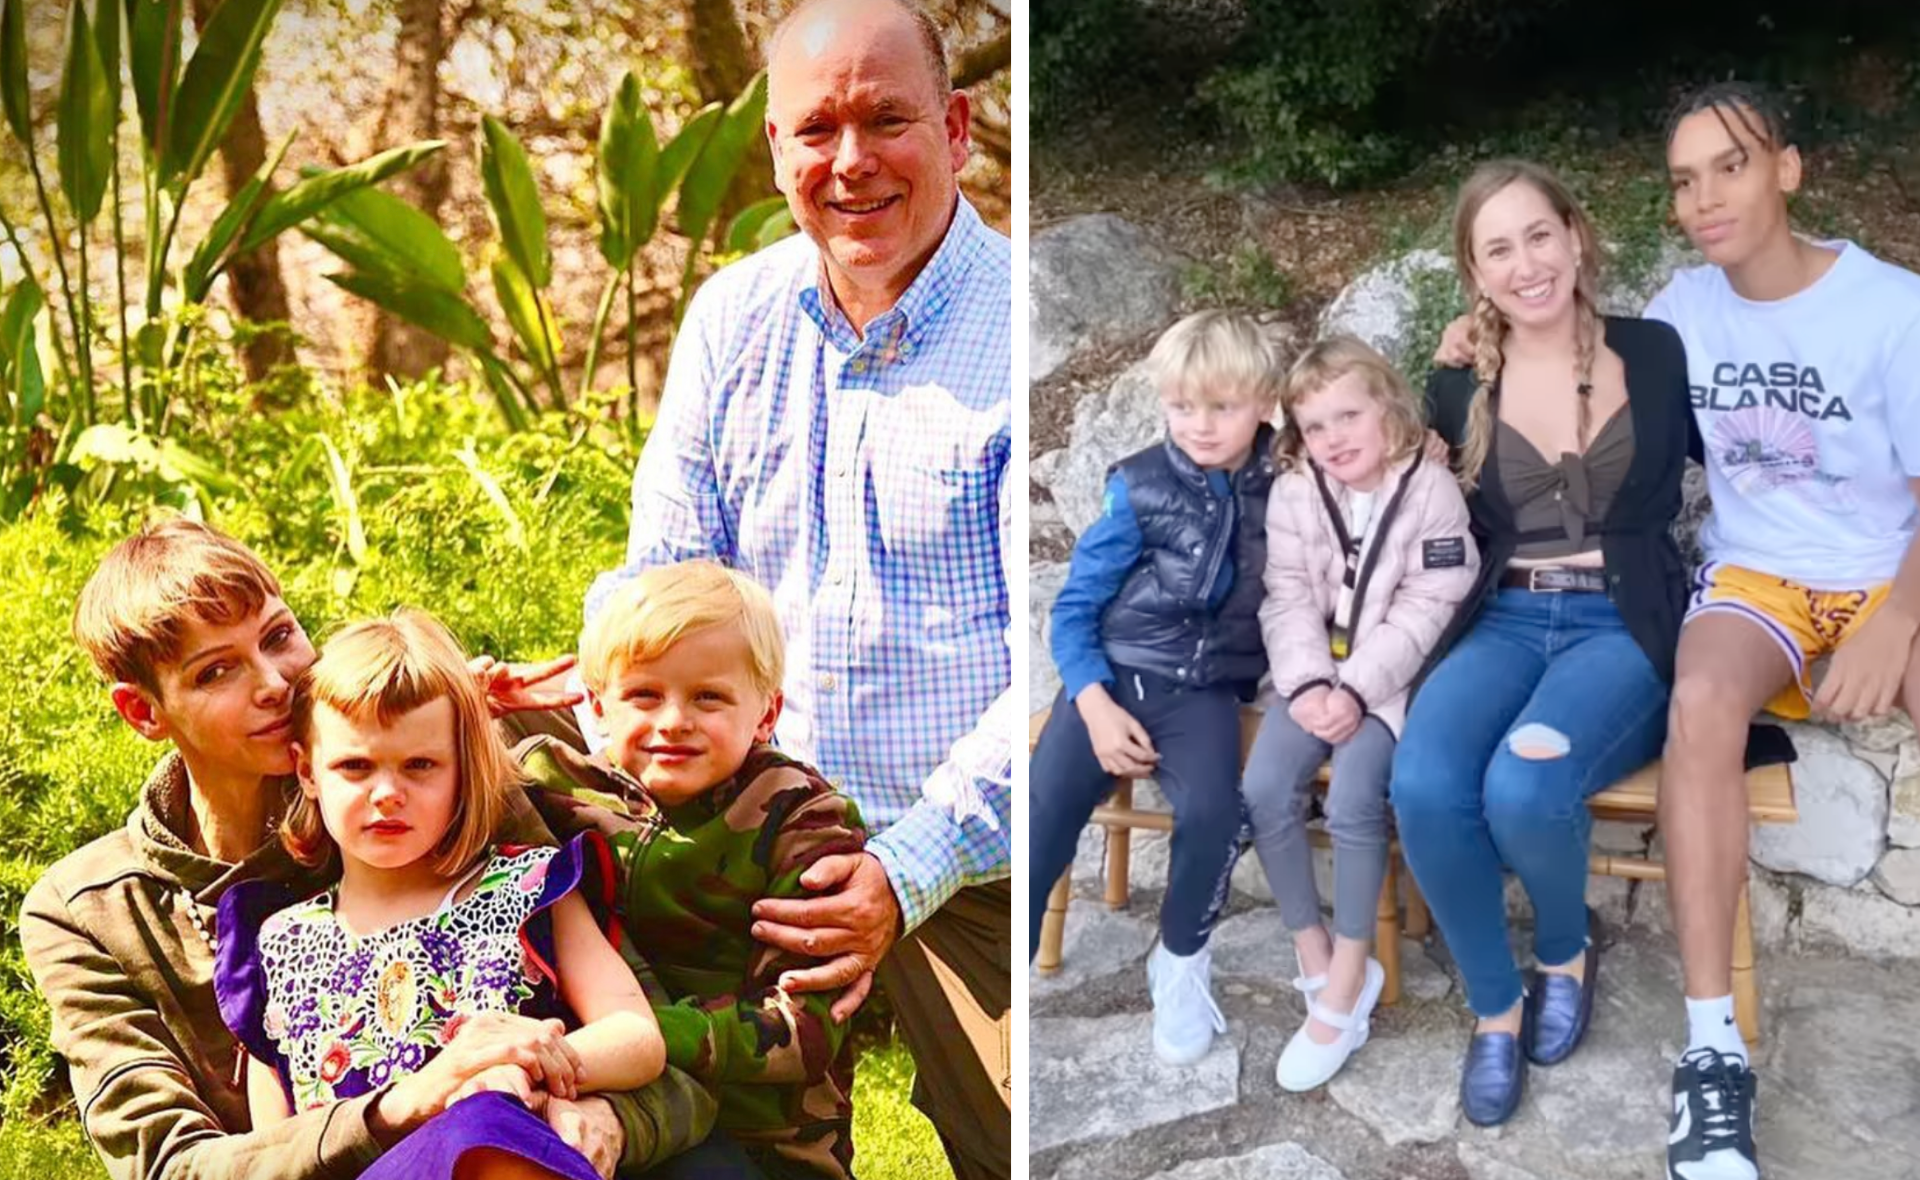 Who are Prince Albert of Monaco’s children? Meet the royal kids here